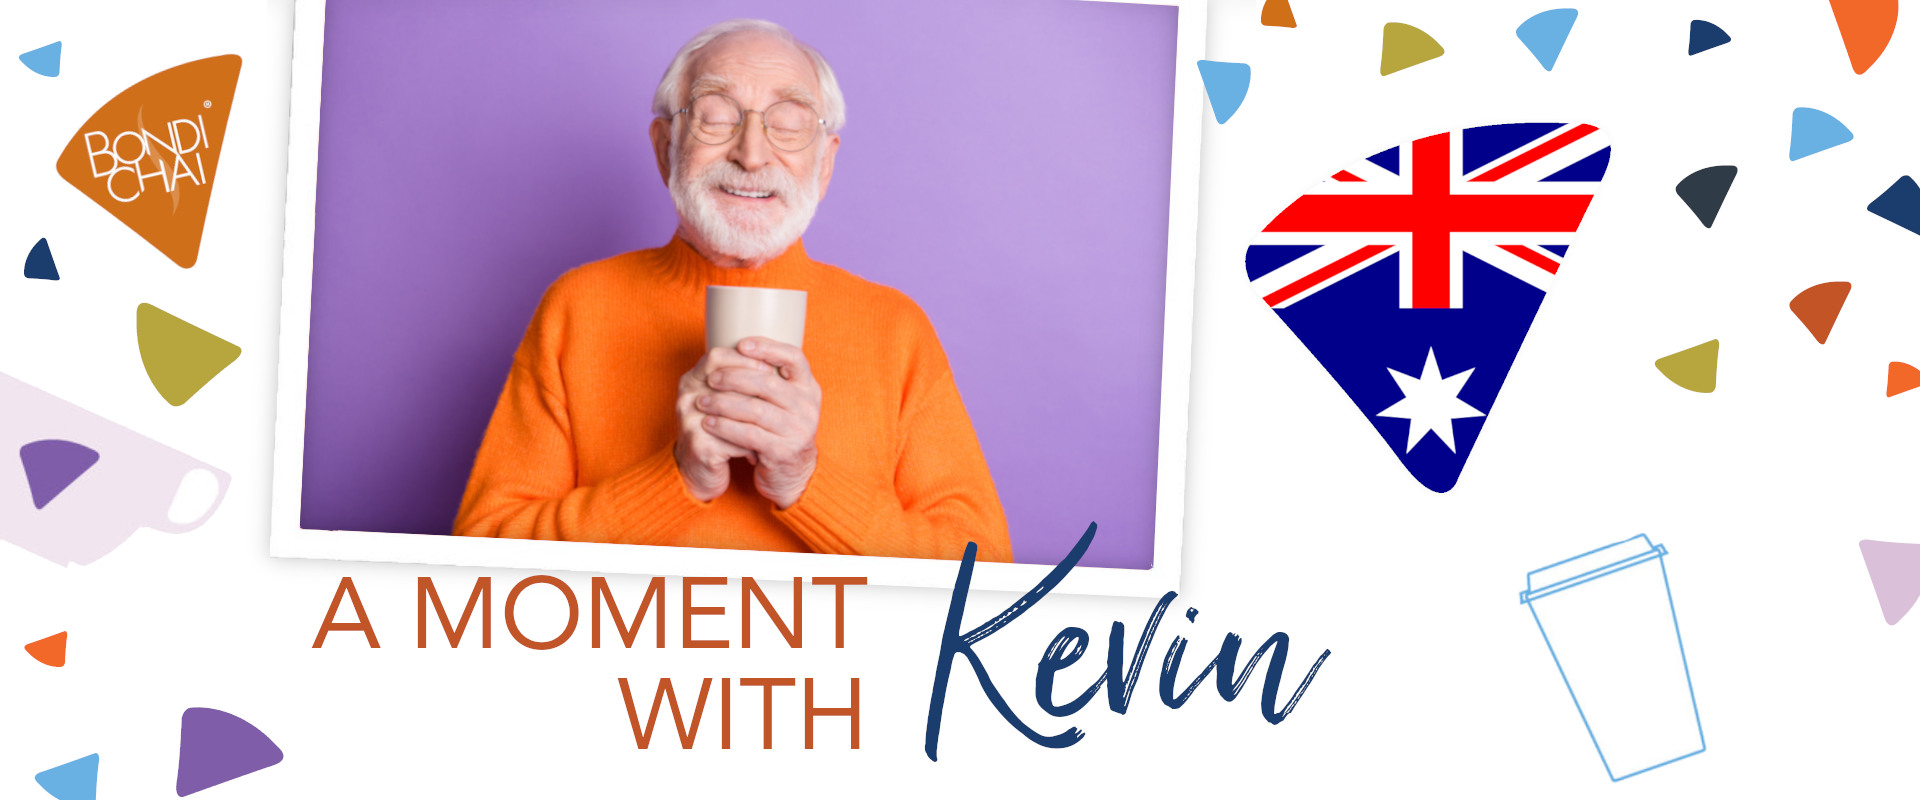 bondi-chai-a-moment-with-kevin